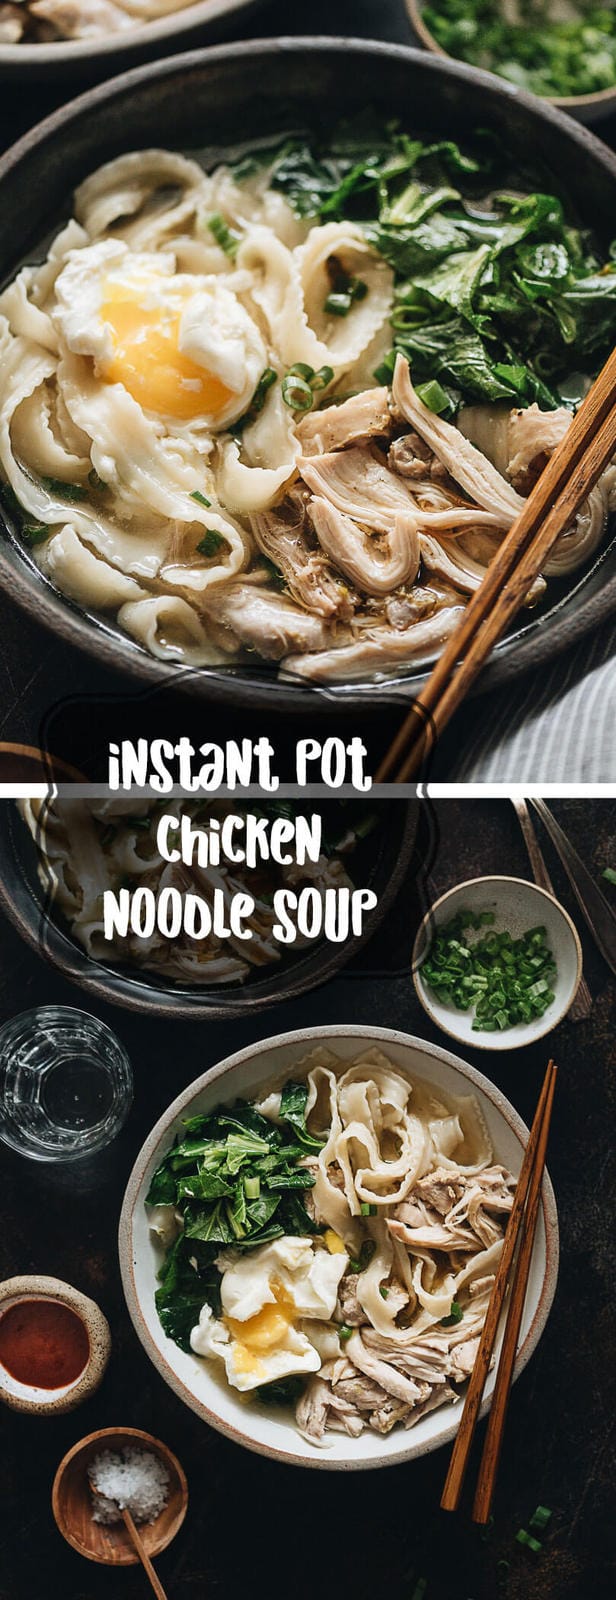 Asian Instant Pot Chicken Noodle Soup (A Pressure Cooker Recipe) - The heartiest and easiest one-pot dinner - you can simply dump in the ingredients and forget about it, and it’ll be ready in 30 minutes. #glutenfree #chicken #soup #instantpot #recipes